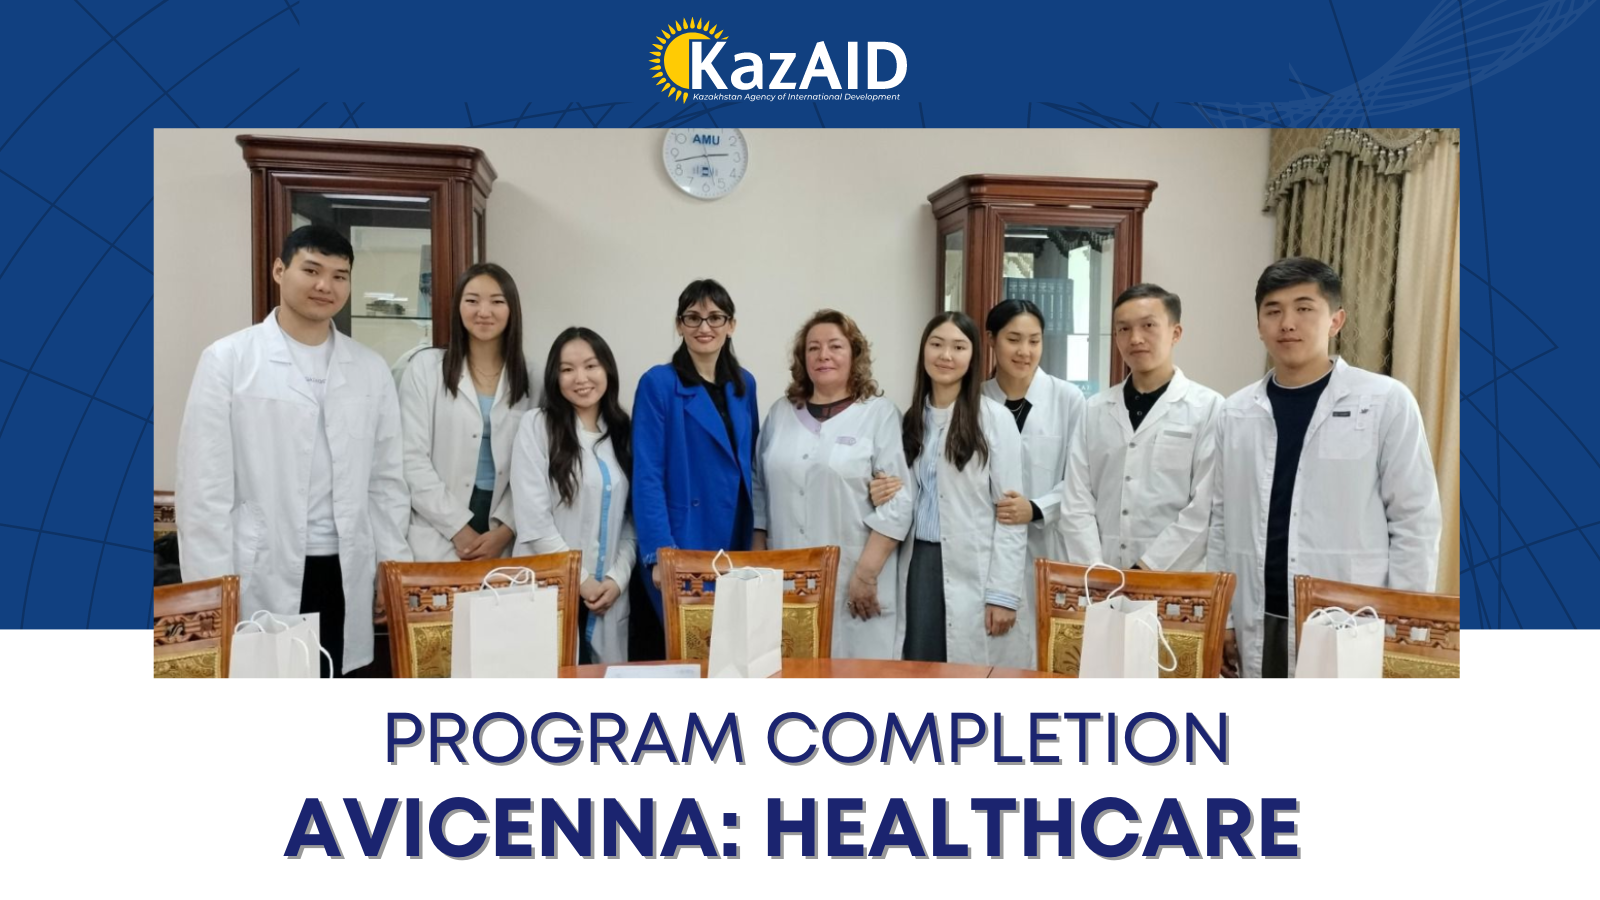 The Avicenna: Health Care program has been completed